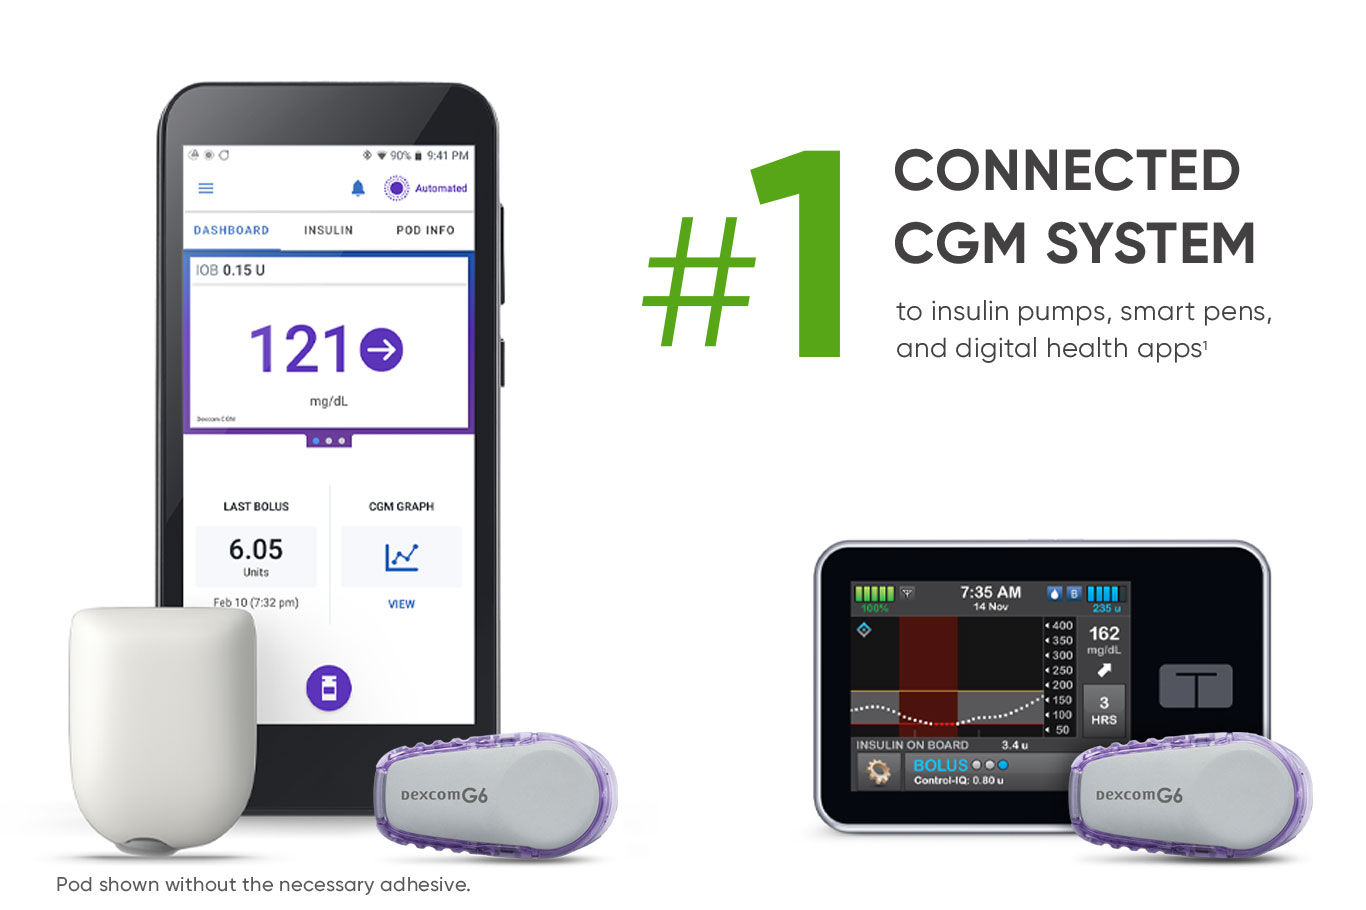 Dexcom G6 omnipod tandem product with #1 claims